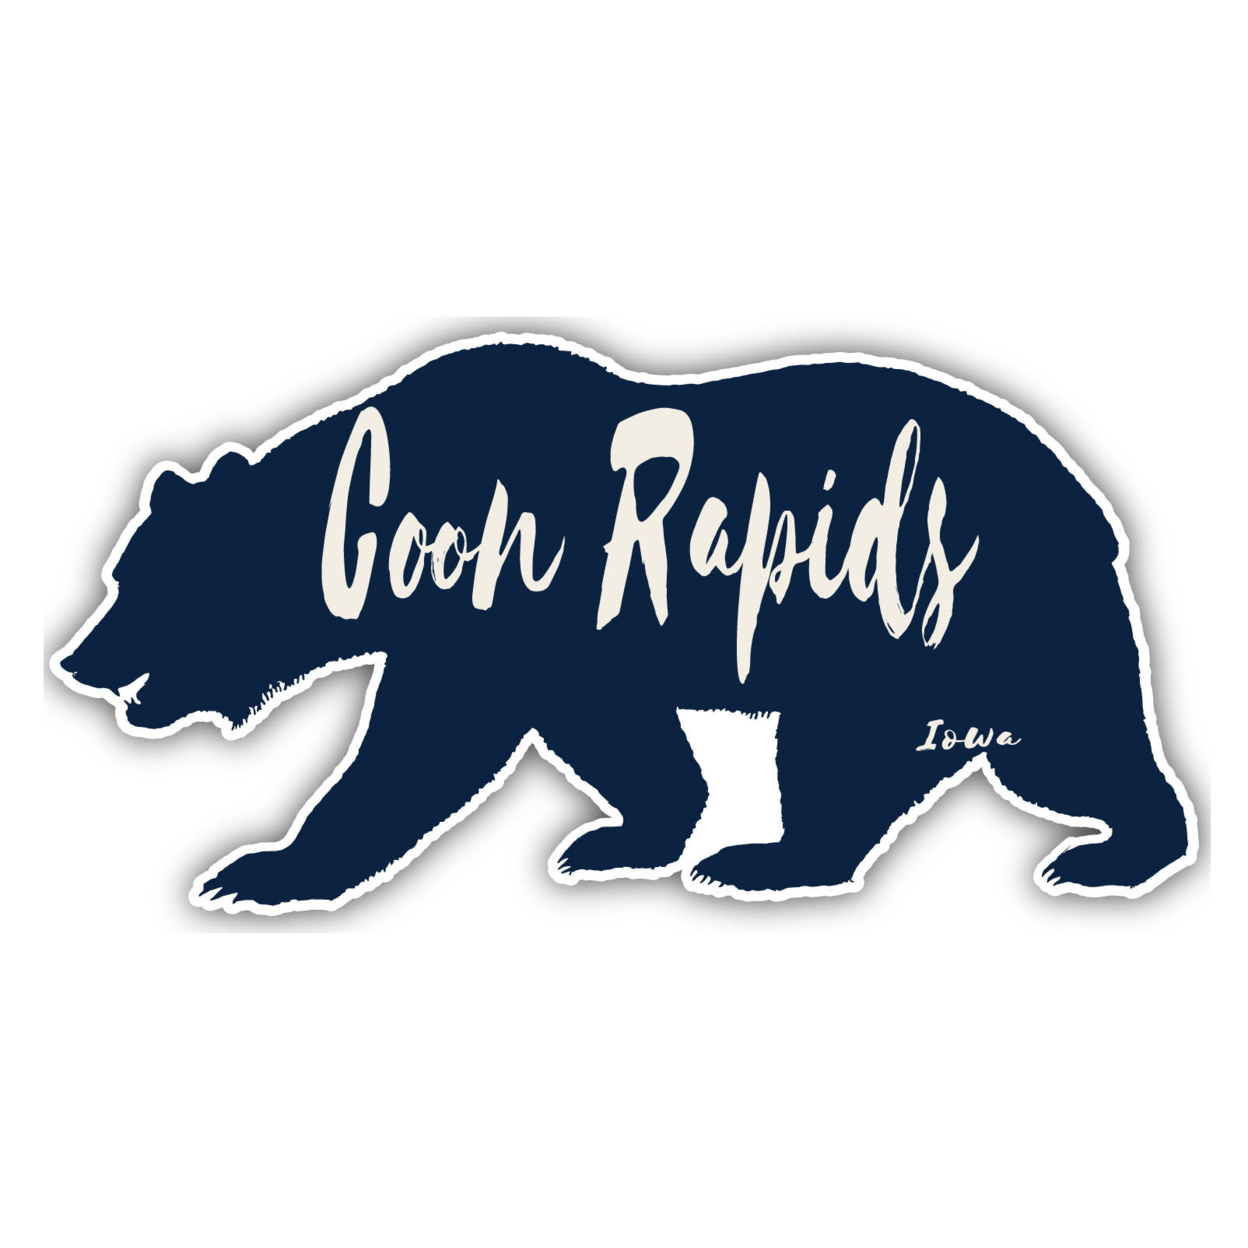 Coon Rapids Iowa Souvenir Decorative Stickers (Choose Theme And Size) - 4-Pack, 12-Inch, Bear